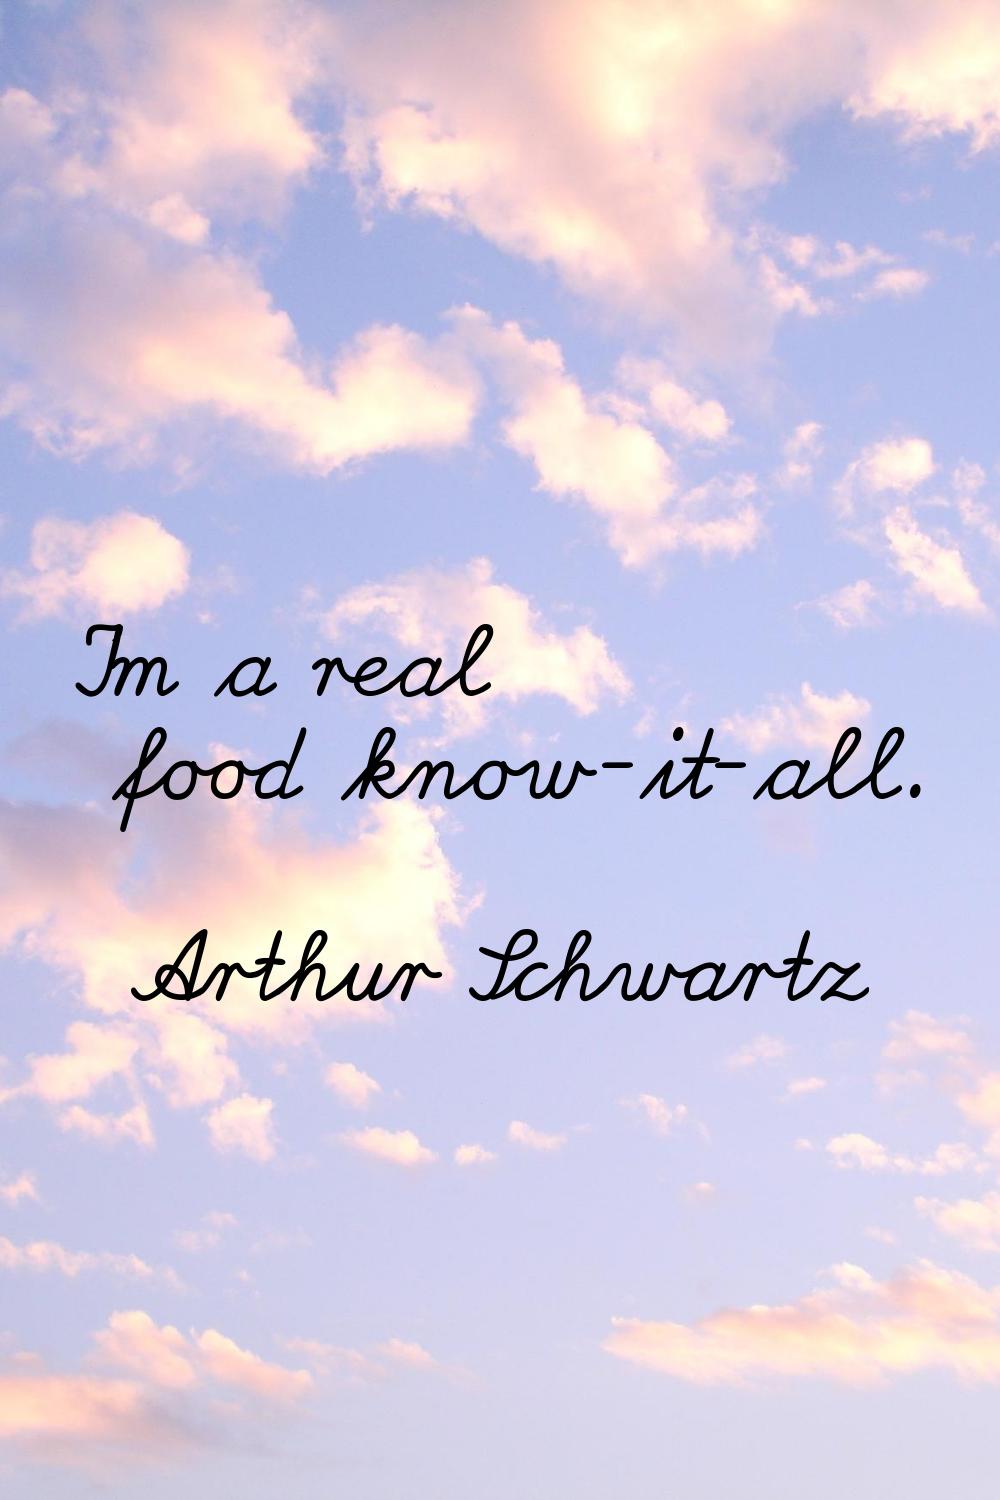 I'm a real food know-it-all.